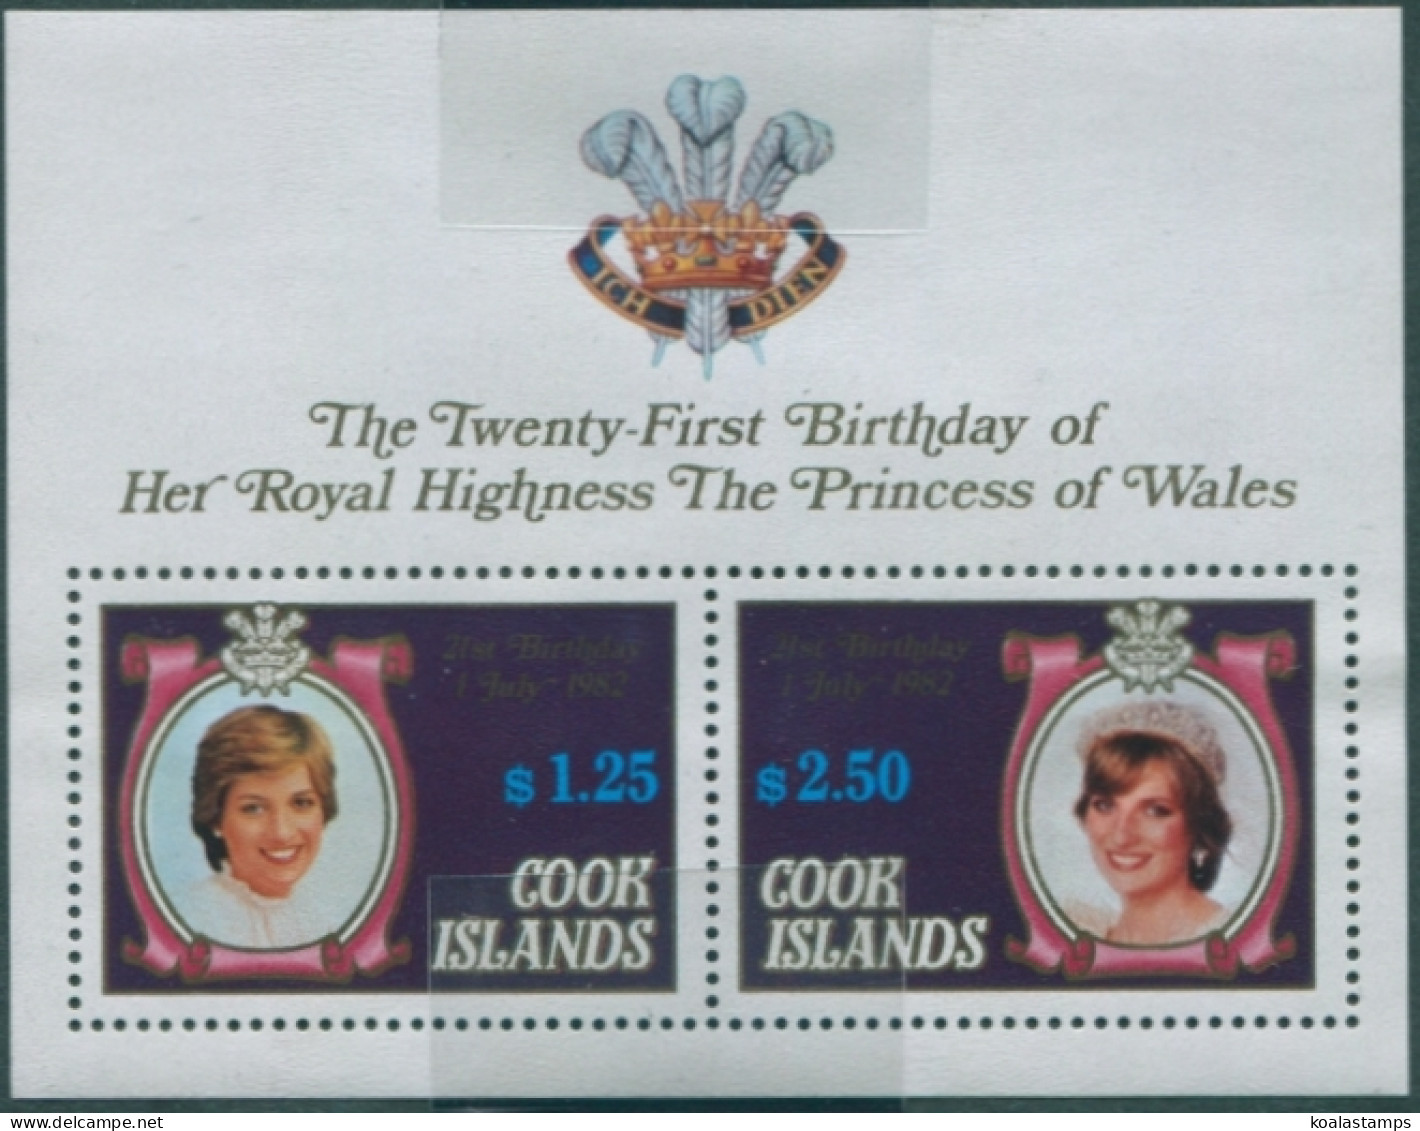 Cook Islands 1982 SG837 Princess Of Wales Birthday MS MNH - Cookinseln